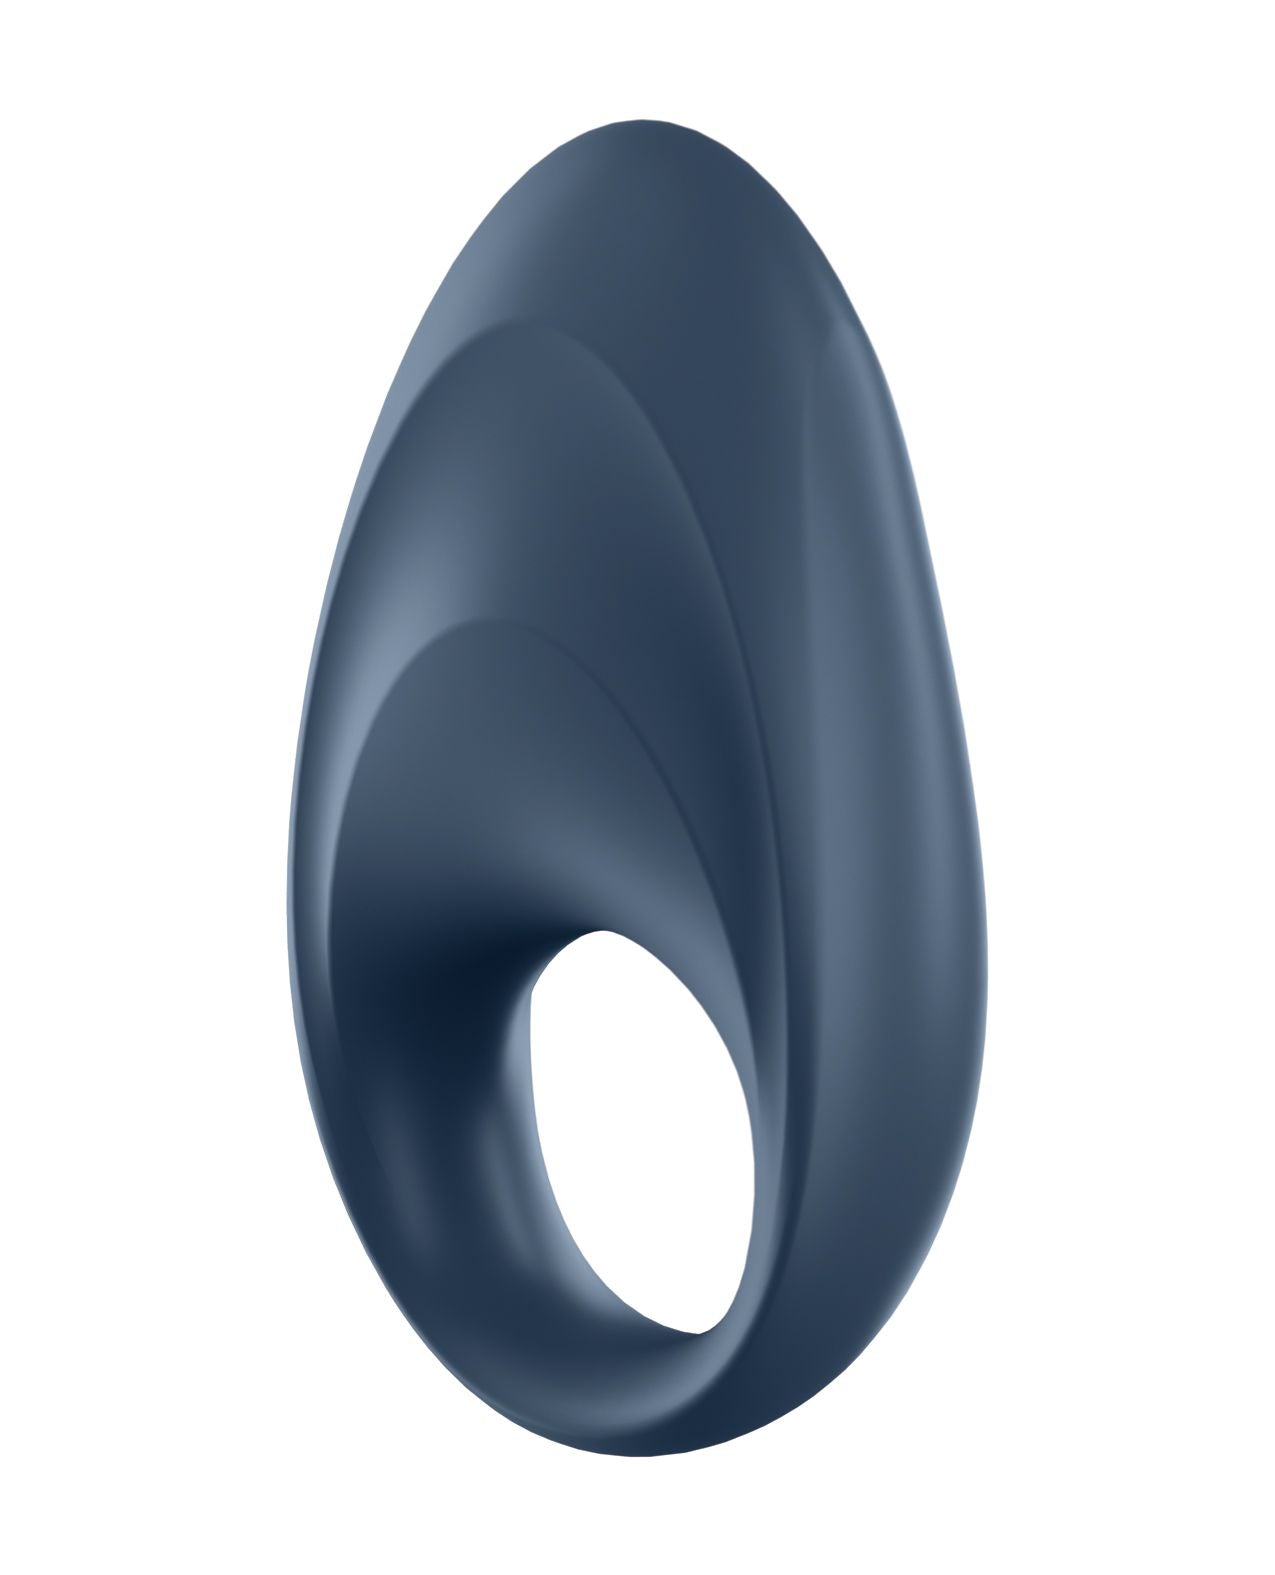 Satisfyer Mighty One Ring w/App - Blue Shipmysextoys